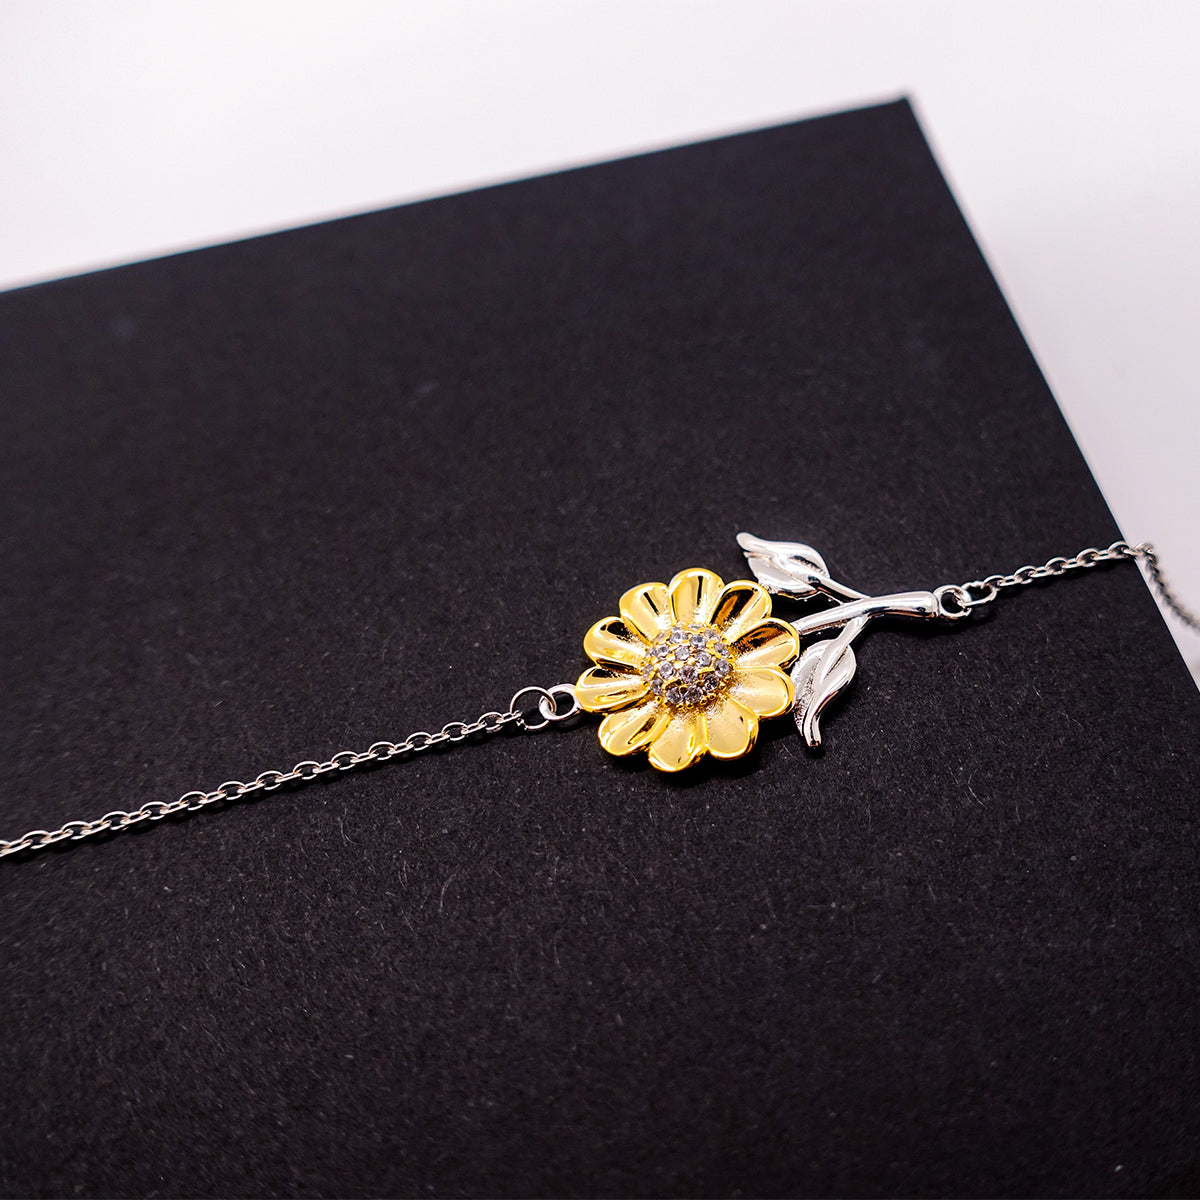 Granny Sunflower Bracelet - Engraved Gift for Grandma, Inspirational Jewelry with Special Meaning, Mothers Day, Christmas, Birthday Present for Her